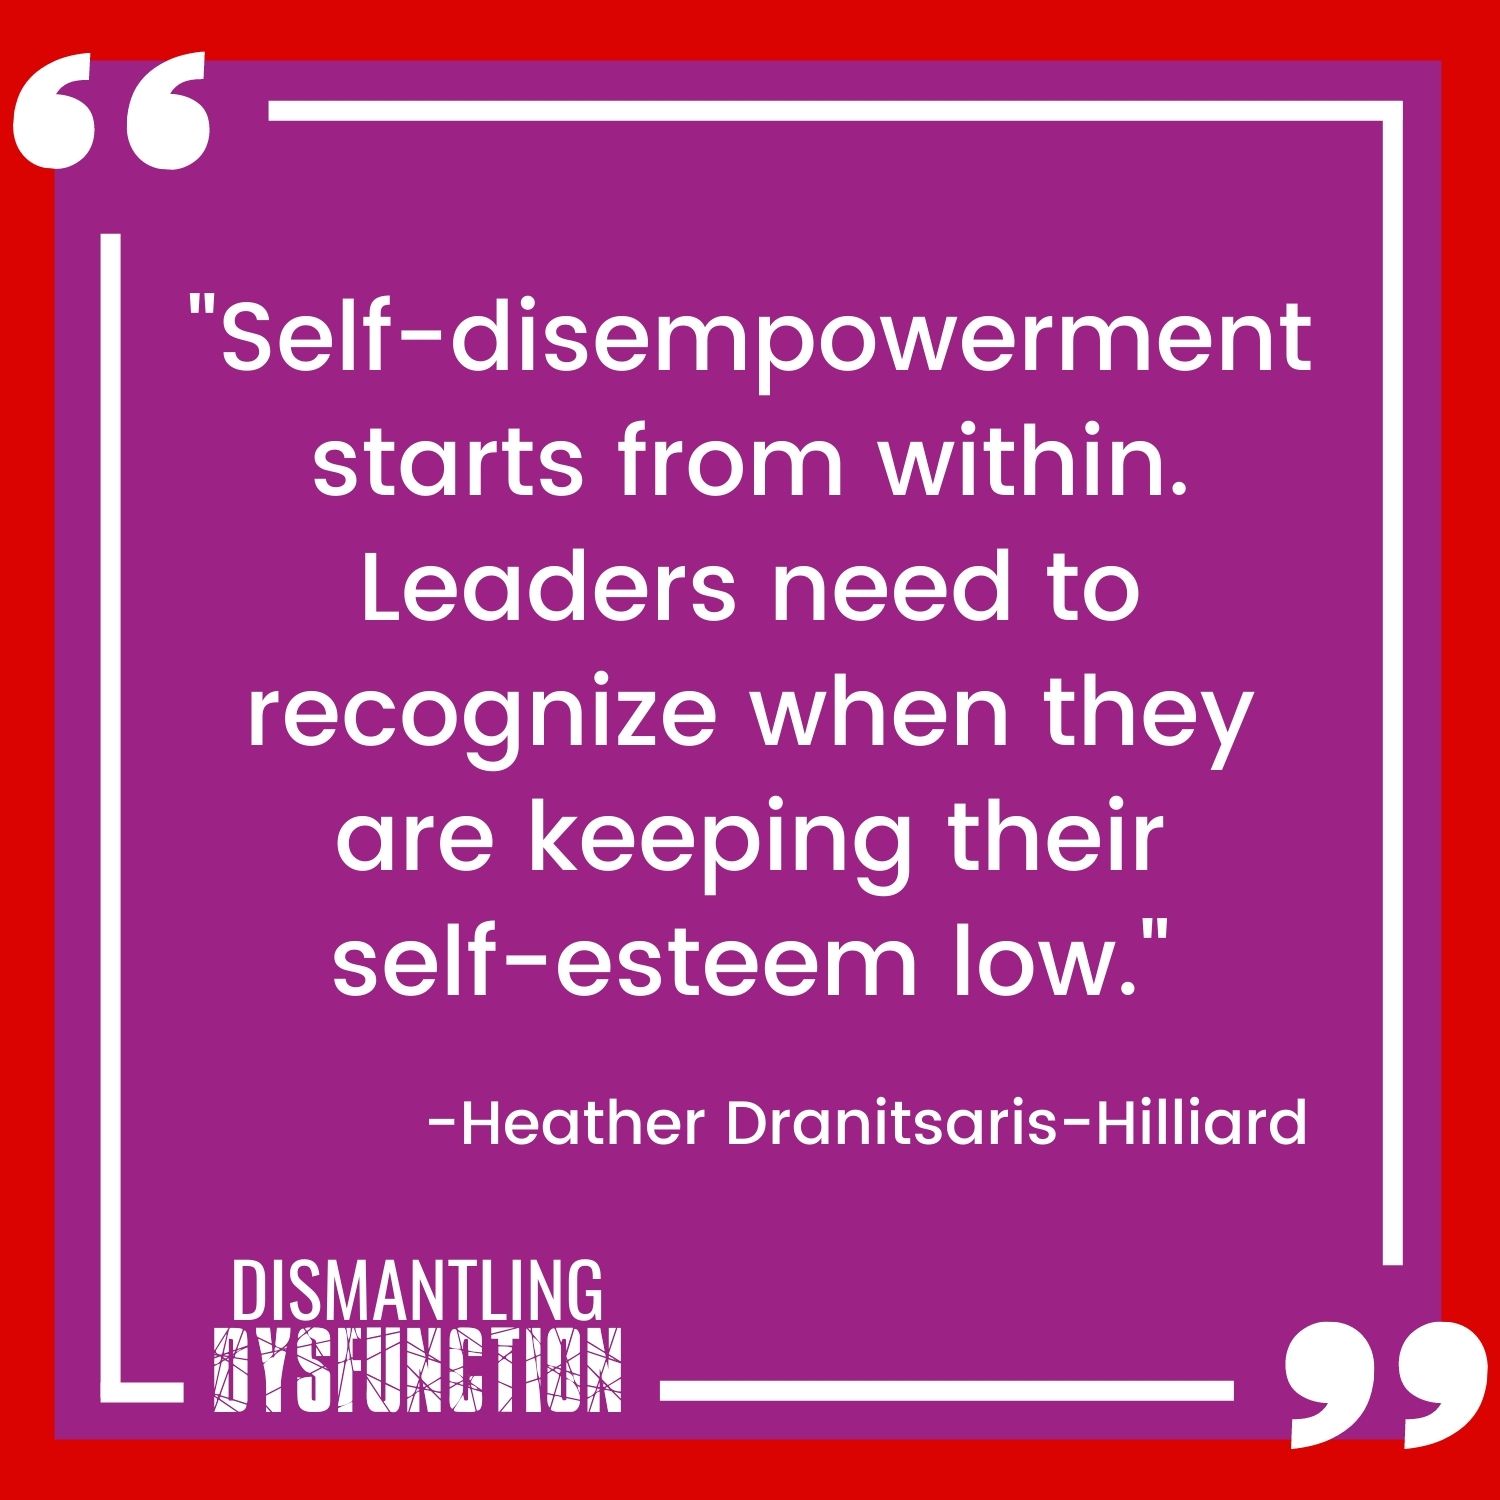 episode 18 quote tile 3 - "Self-disempowerment starts from within. Leaders need to recognize when they are keeping their self-esteem low."